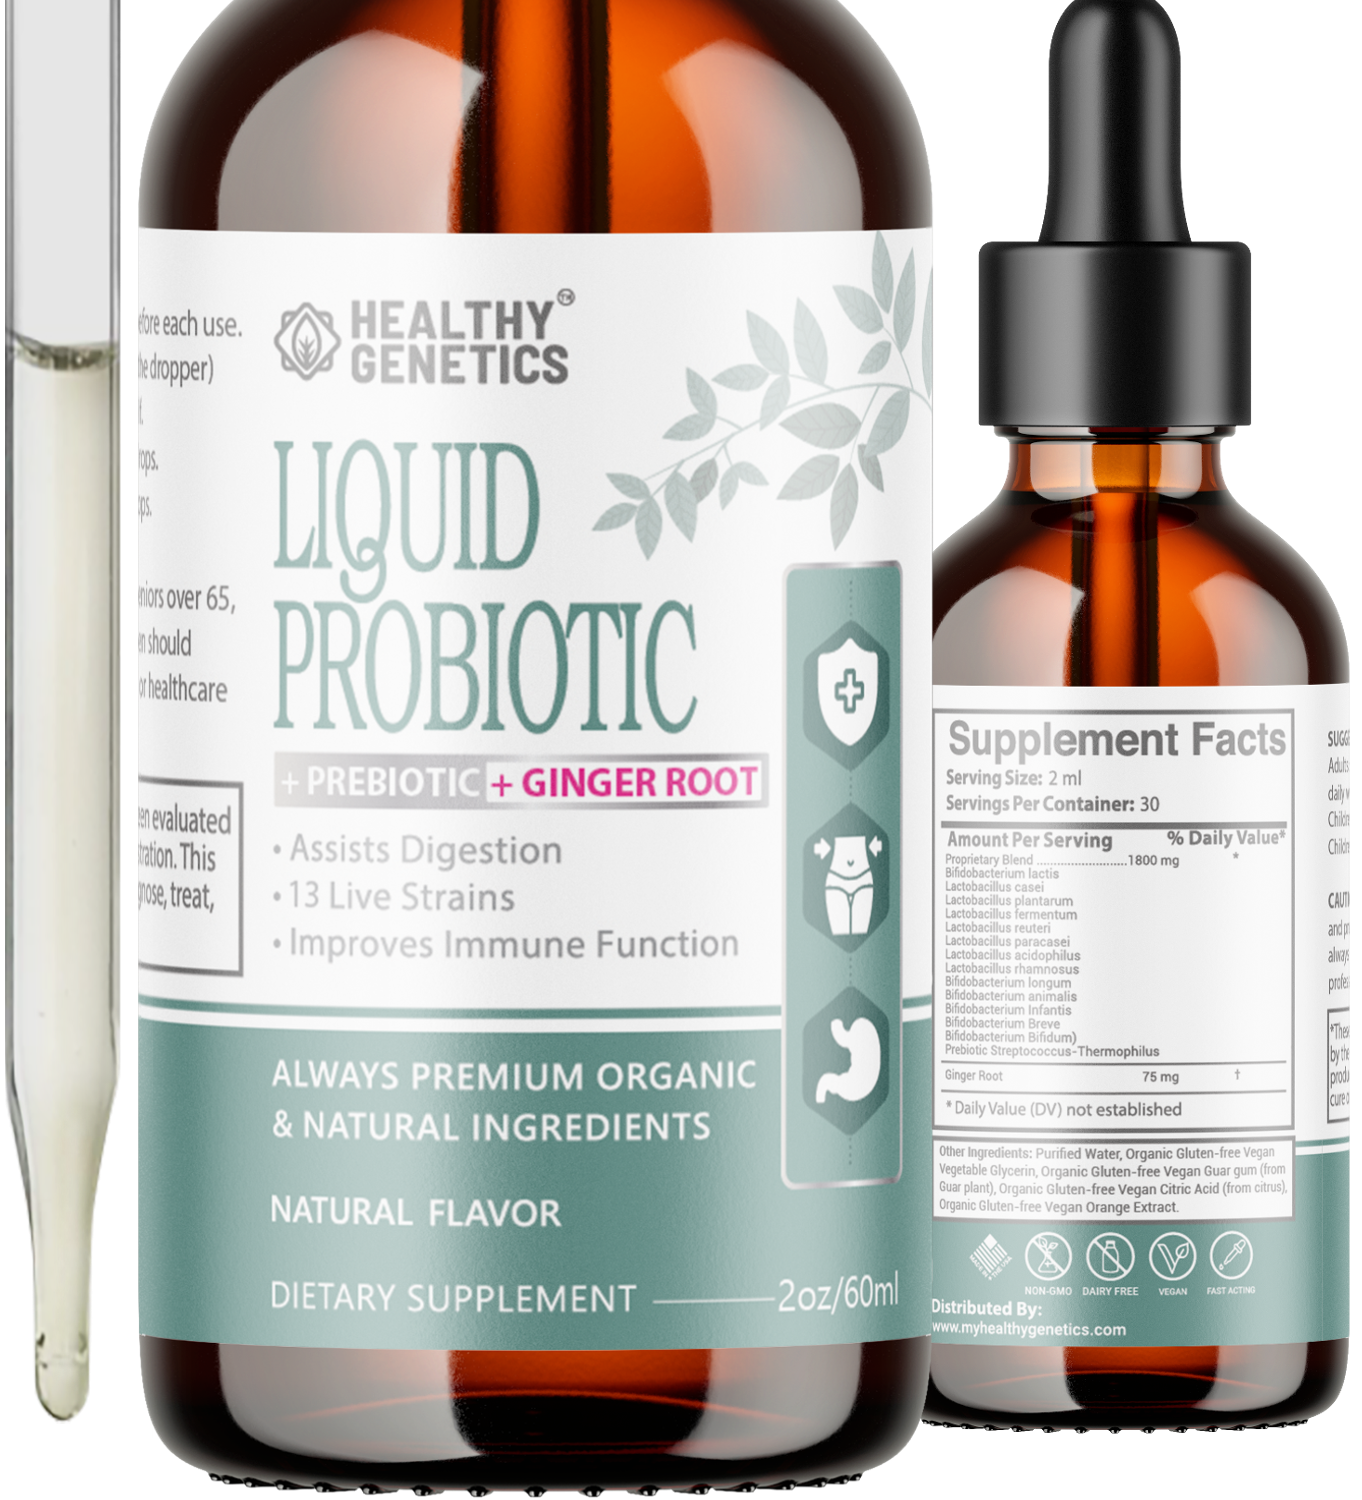 Load image into Gallery viewer, Organic Liquid Probiotics - All-Natural and Plant-Based Formulation, 12 Live Strains - Assist in Digestion, Immunity Defense Booster - Ideal for Men, Women, Toddlers and Kids - 2Oz/60ml
